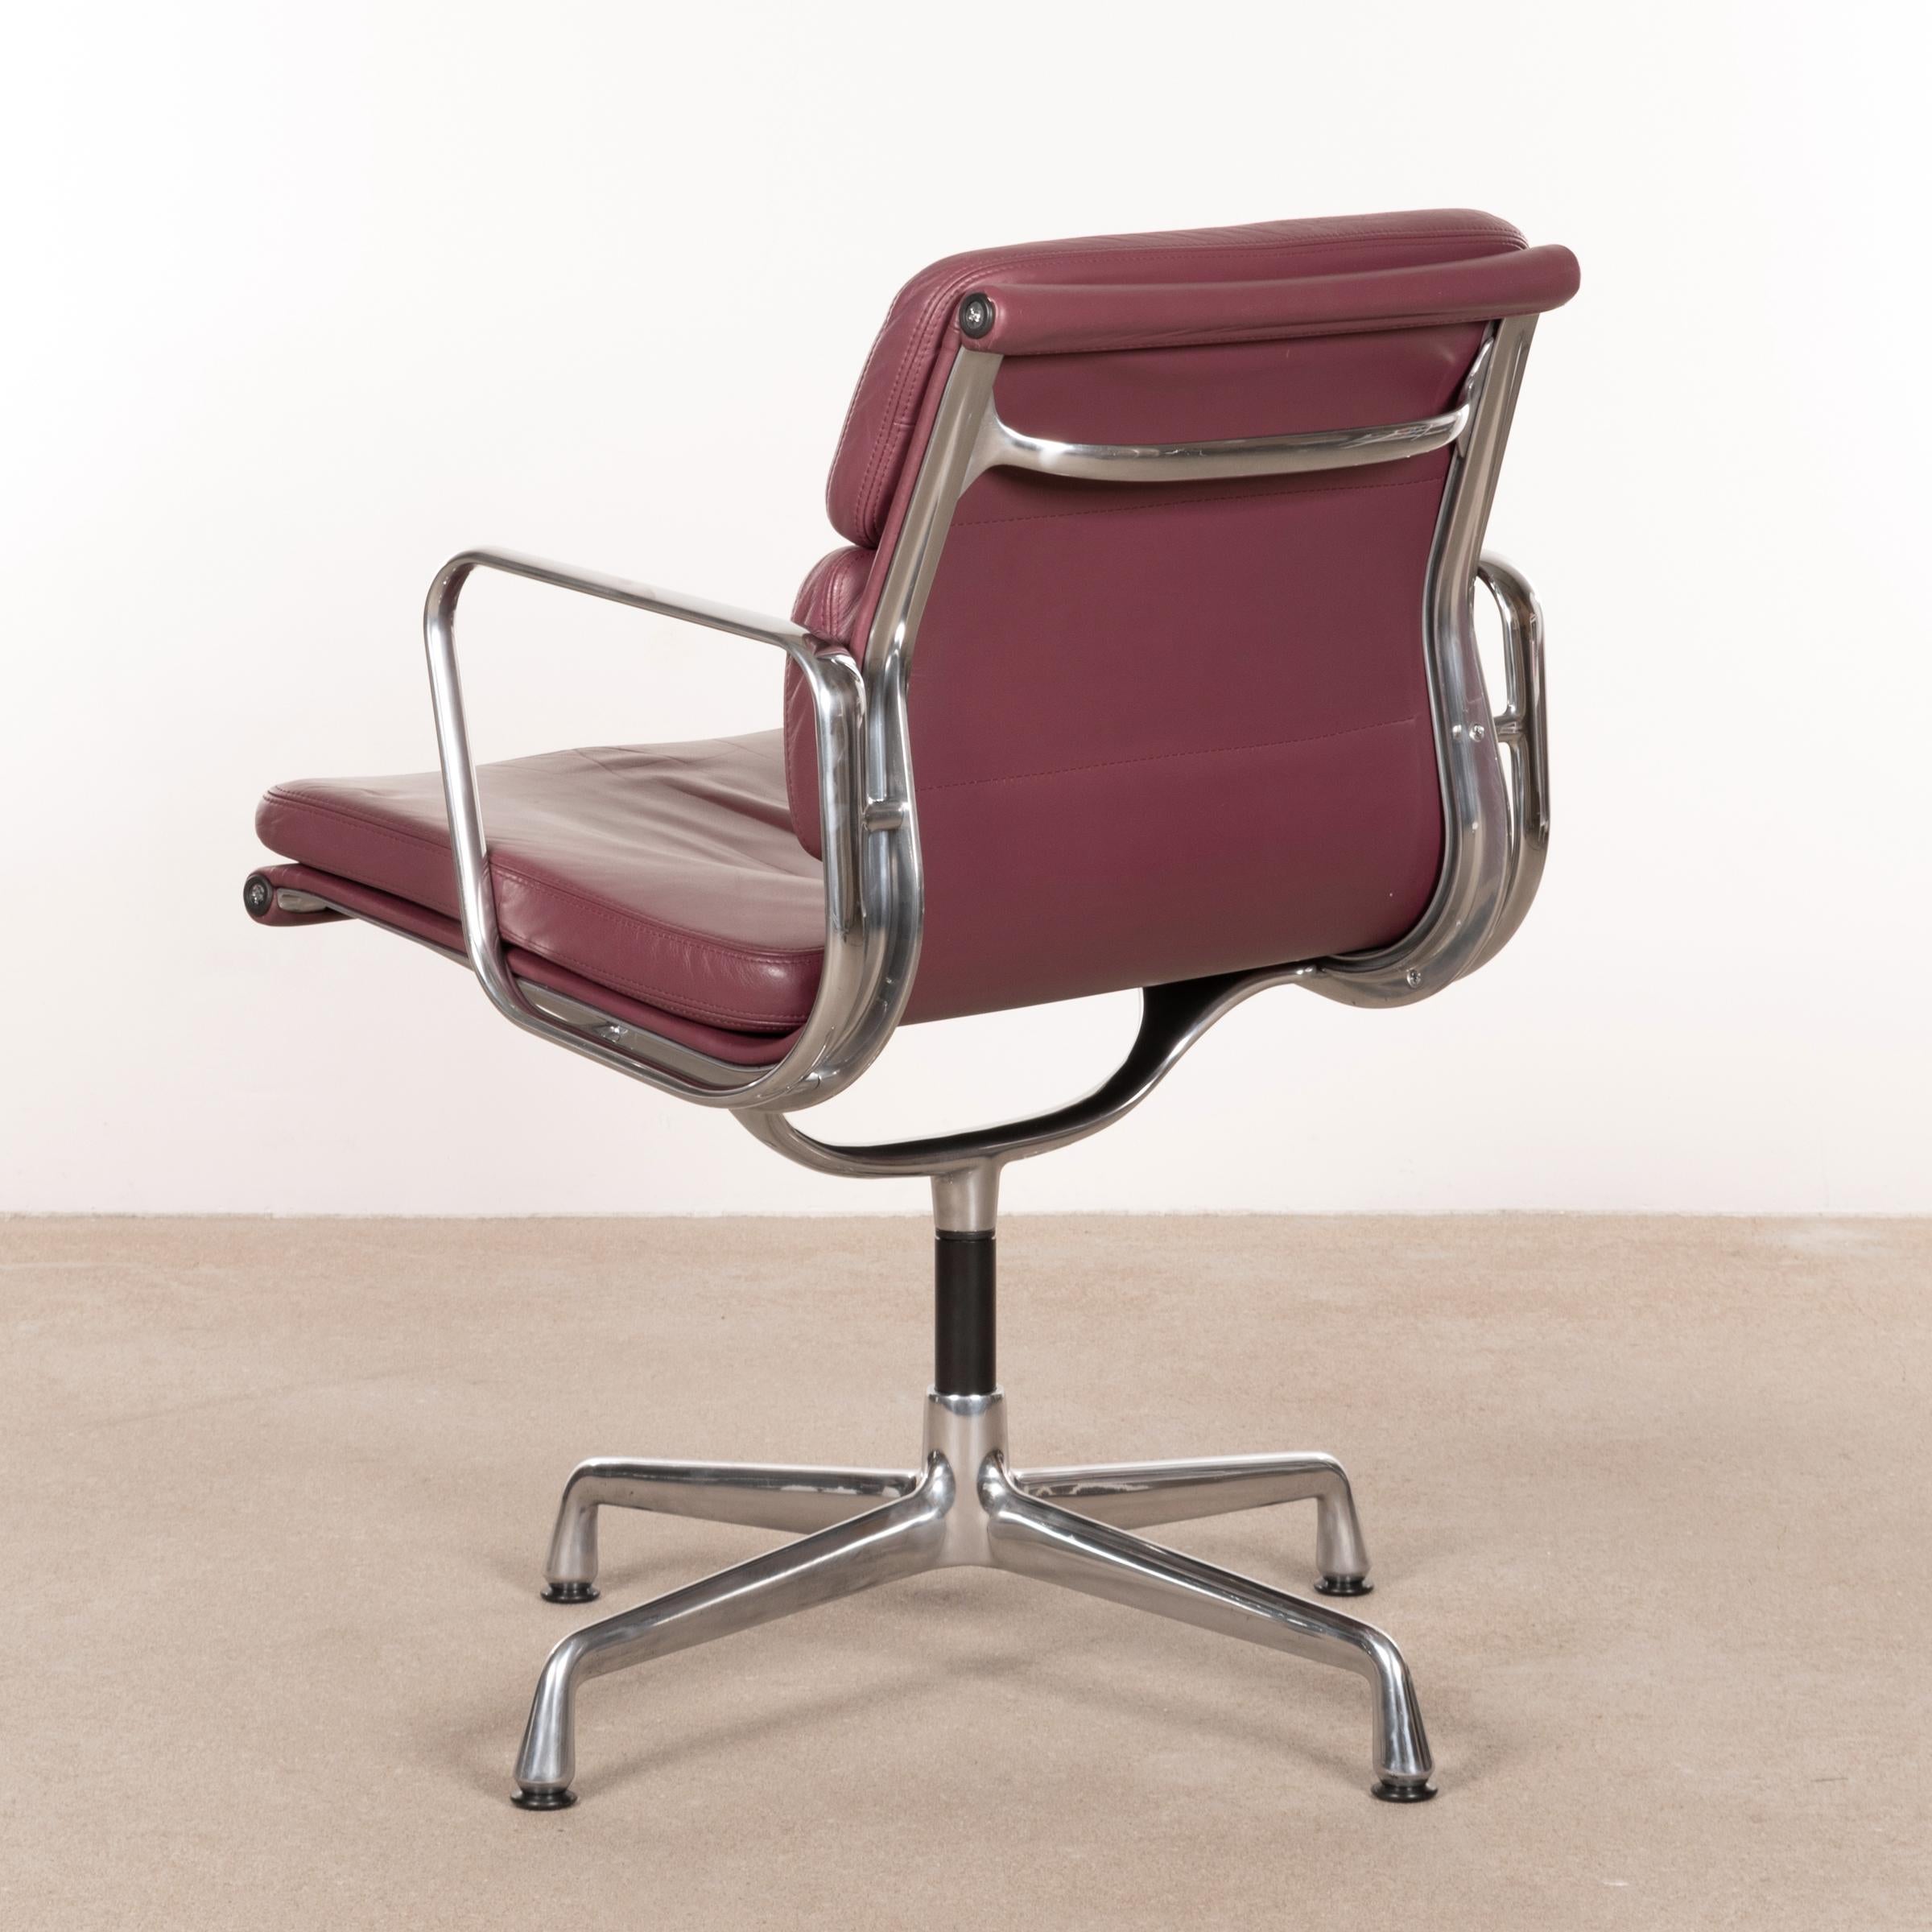 Mid-Century Modern Charles & Ray Eames EA208 Soft Pad Chairs in Aubergine / Purple Leather by Vitra